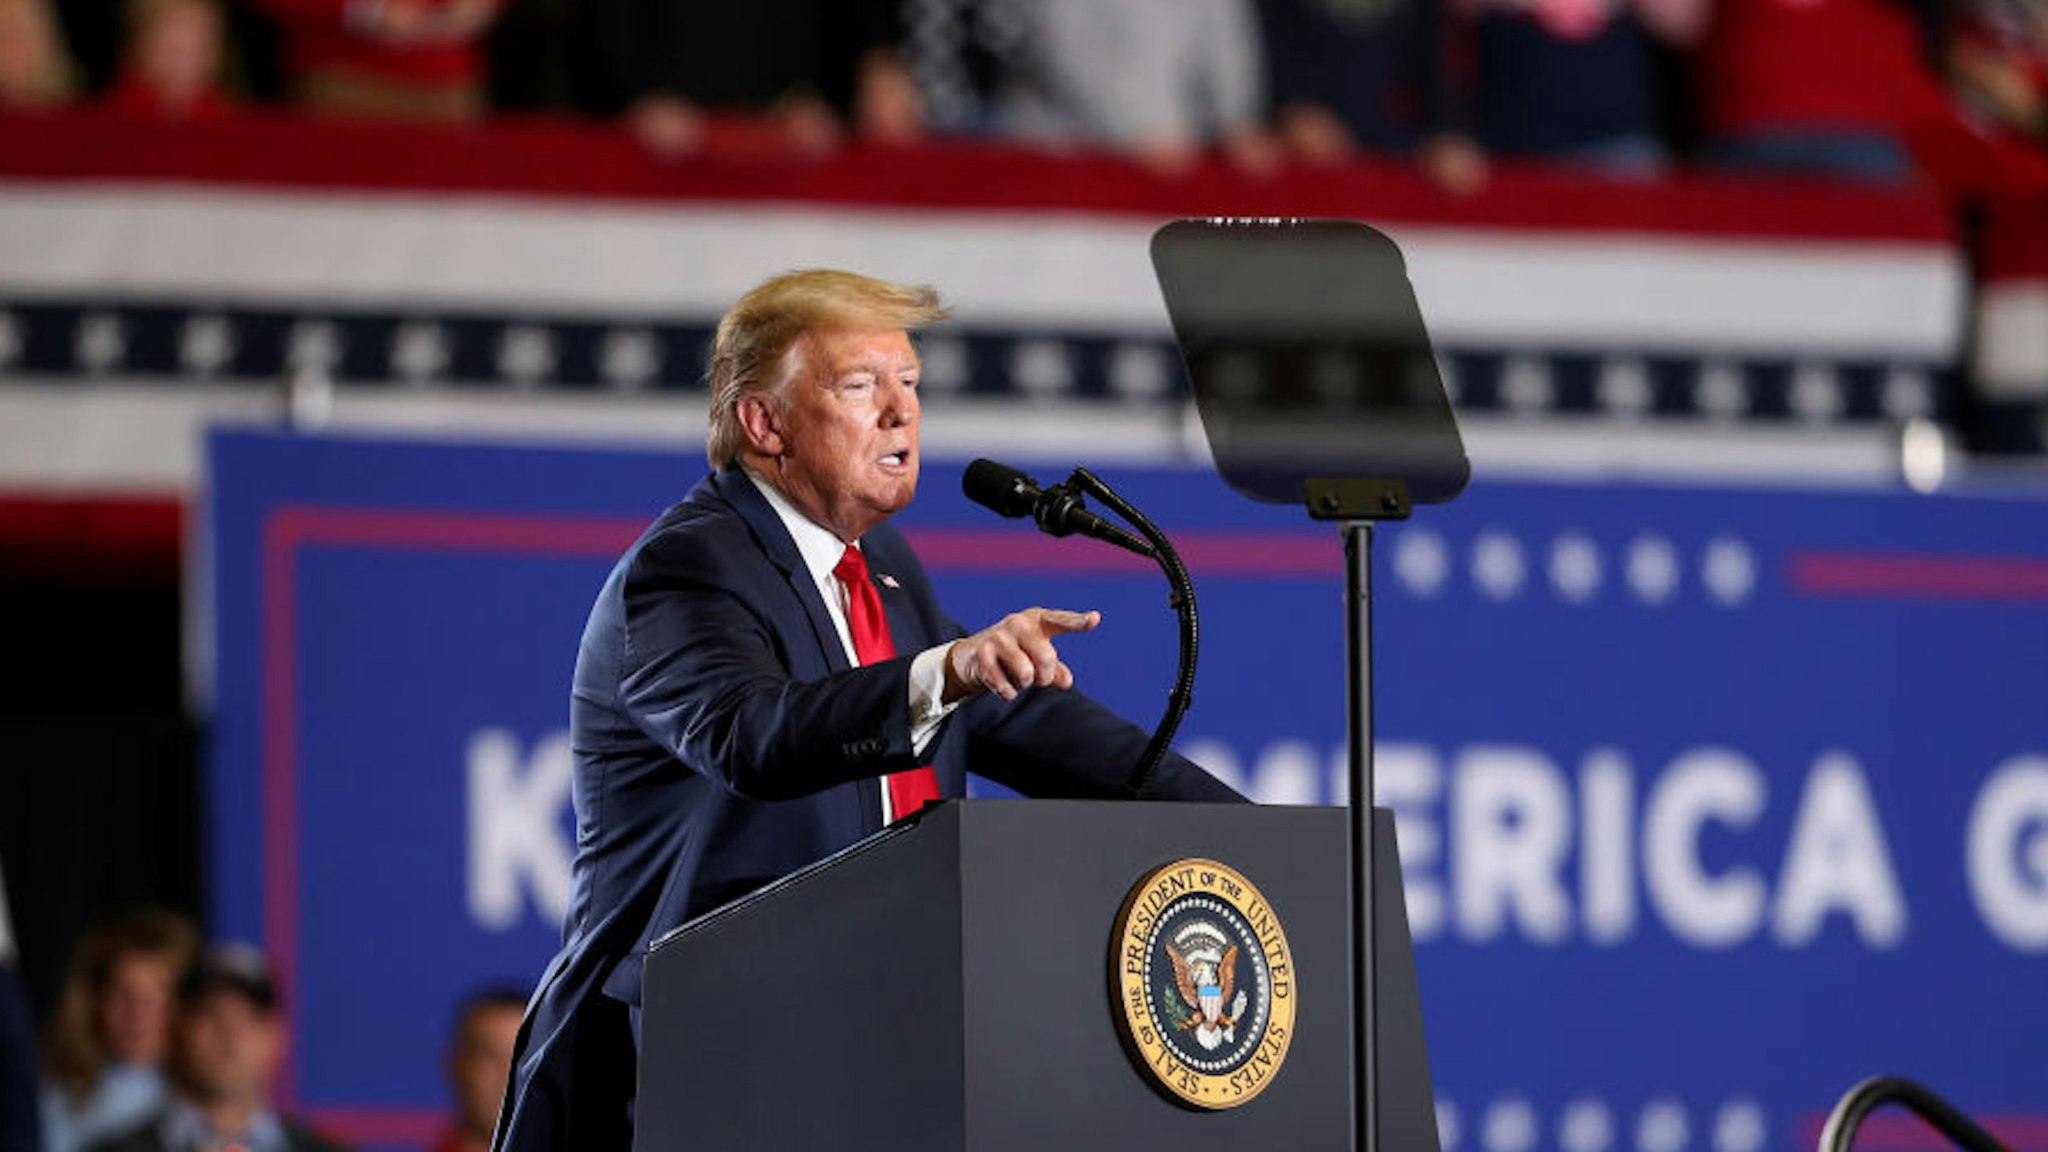 NEW JERSEY, USA - JANUARY 28: U.S. President Donald Trump addresses during 'Keep America Great Rally' at the Wildwood Convention Center on January 28, 2020 in Wildwood, New Jersey, United States. (